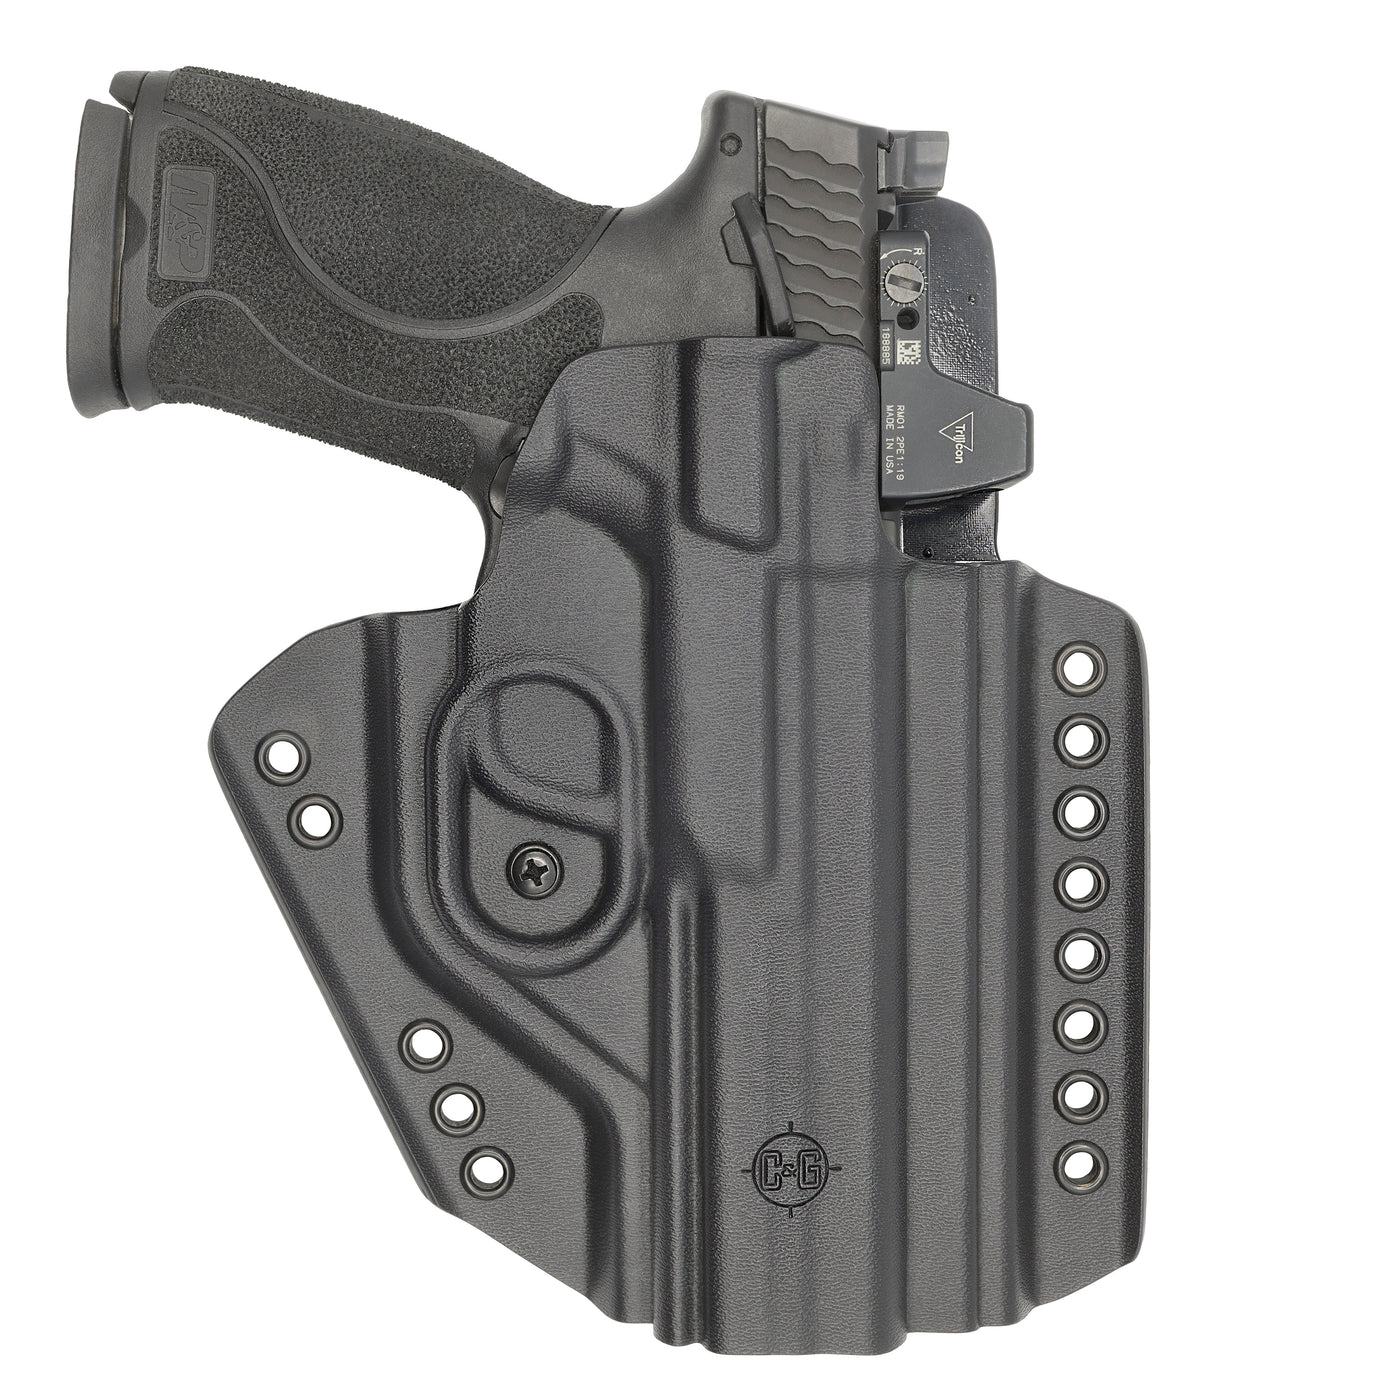 C&G Holsters custom chest mounted system S&W M&P 10/45 holstered